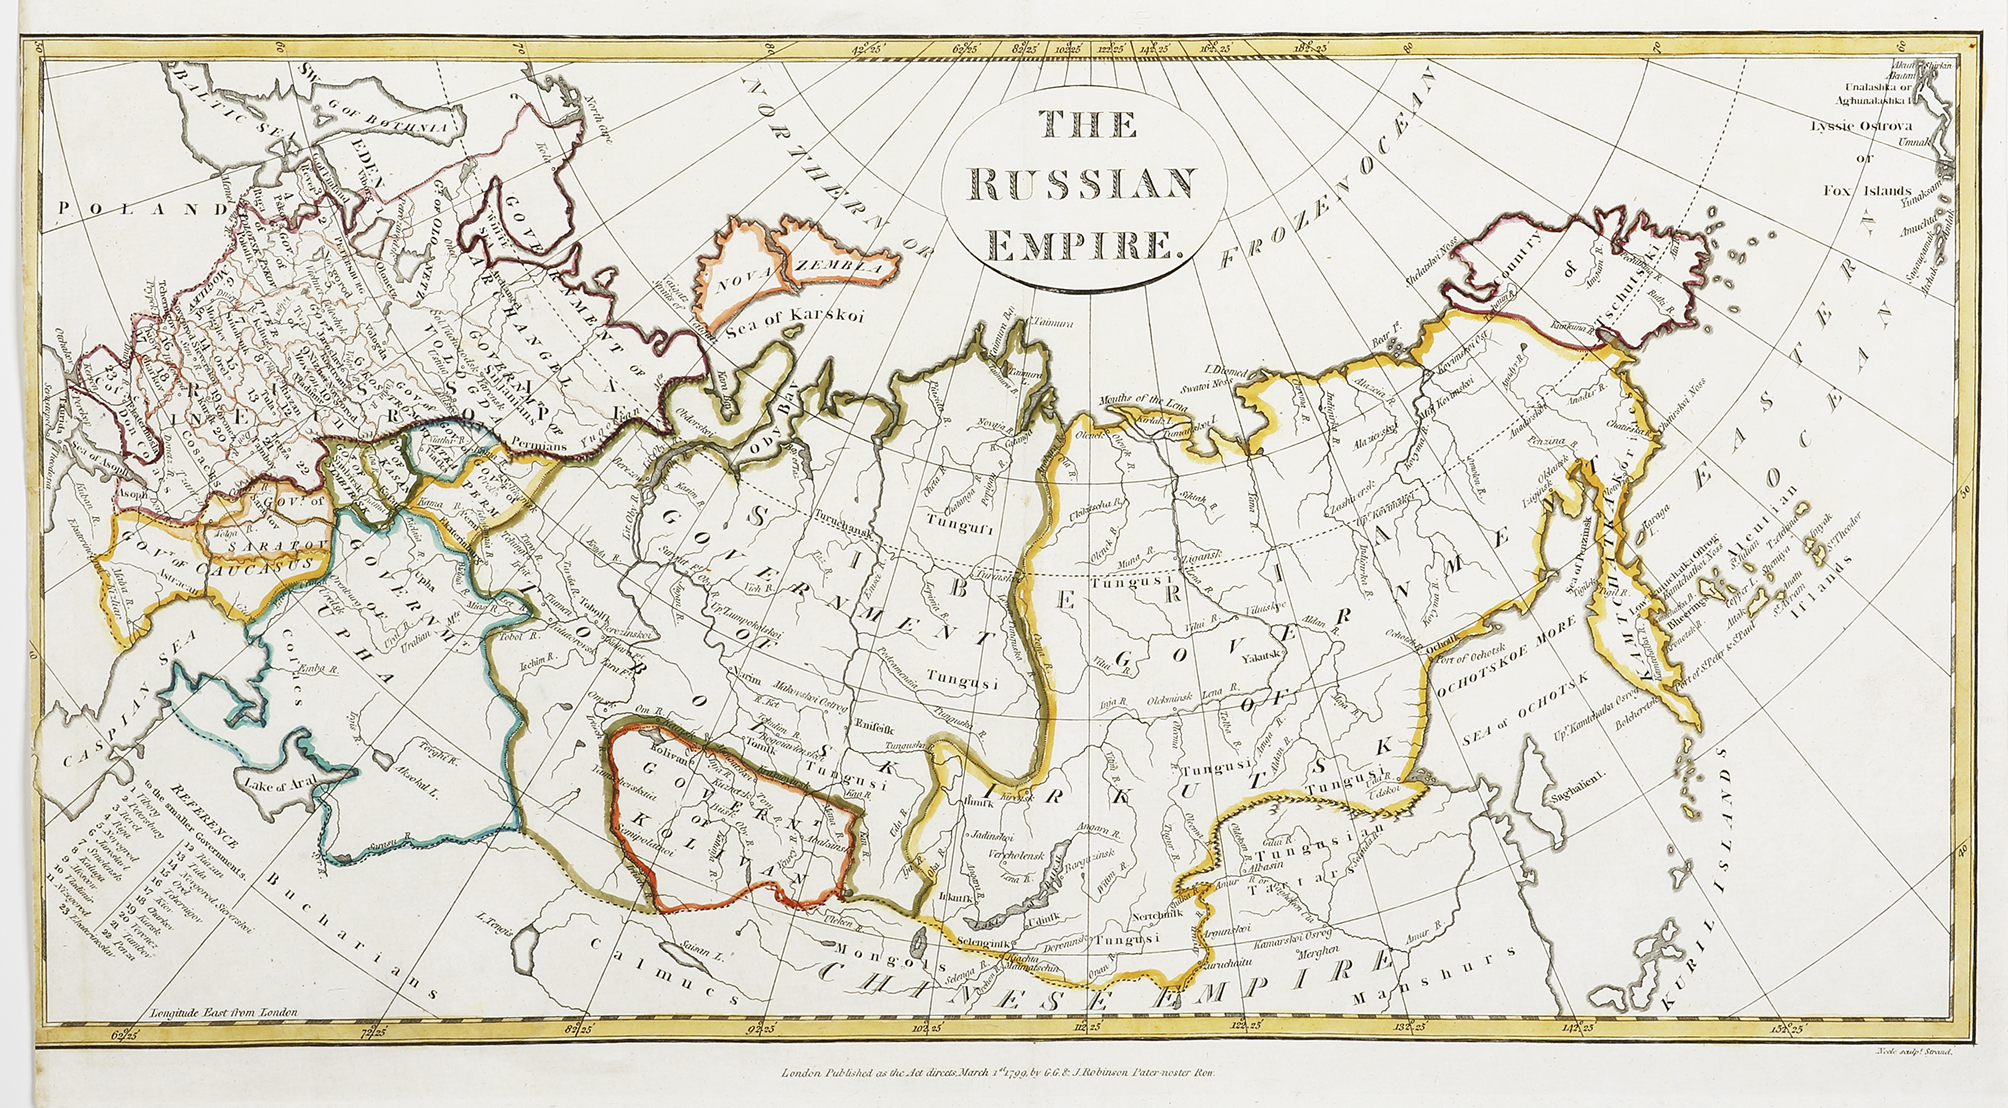 The Russian Empire. - Antique Map from 1800